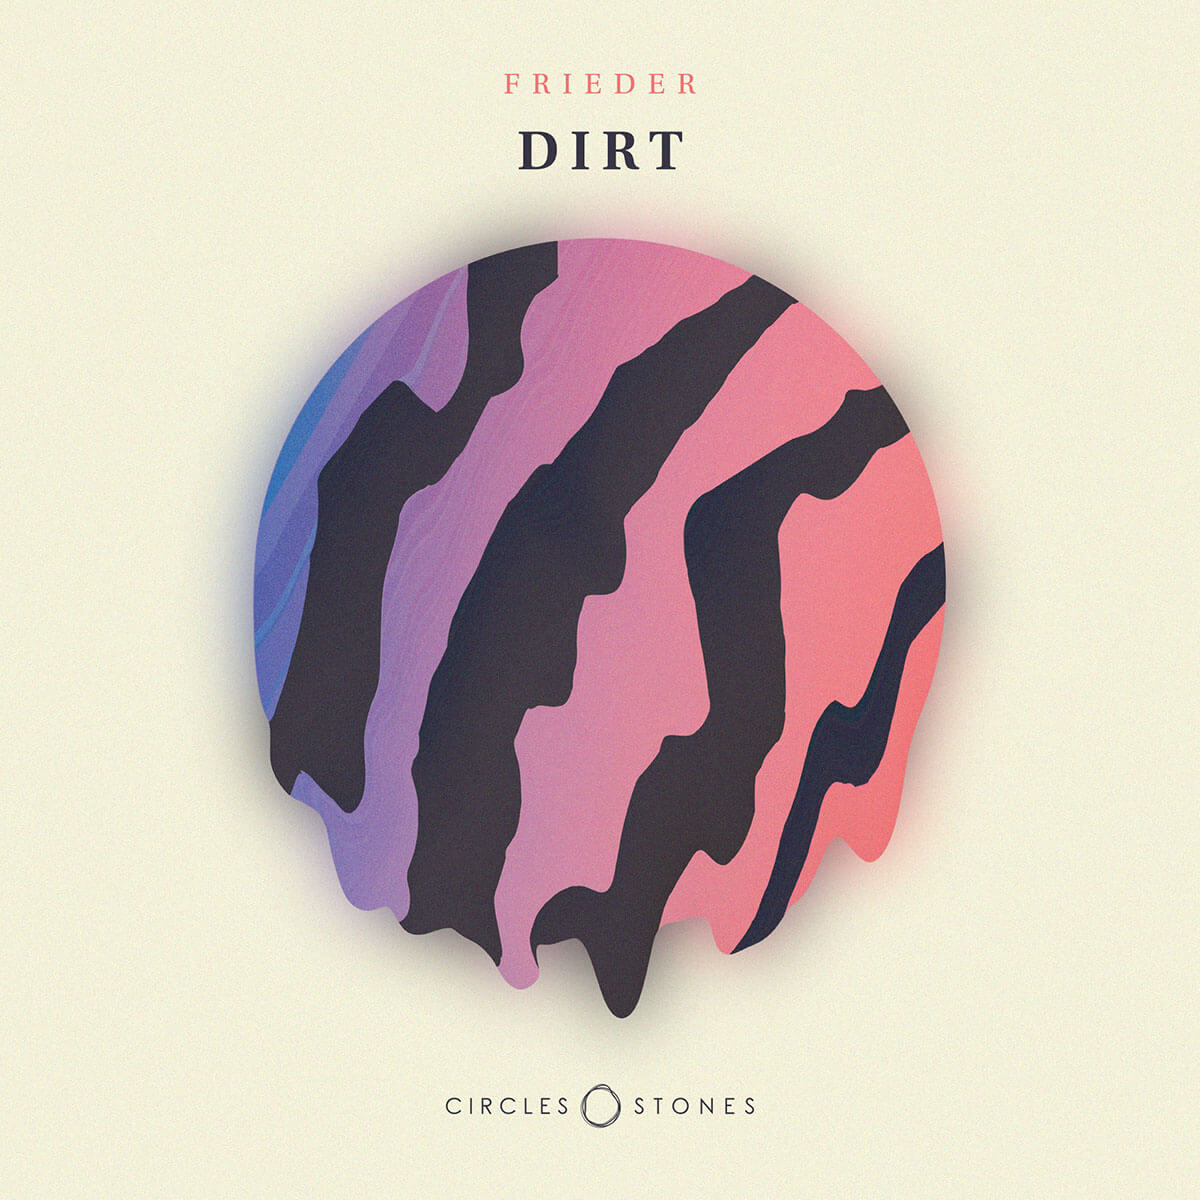 Circles and Stones Frieder Dirt EP